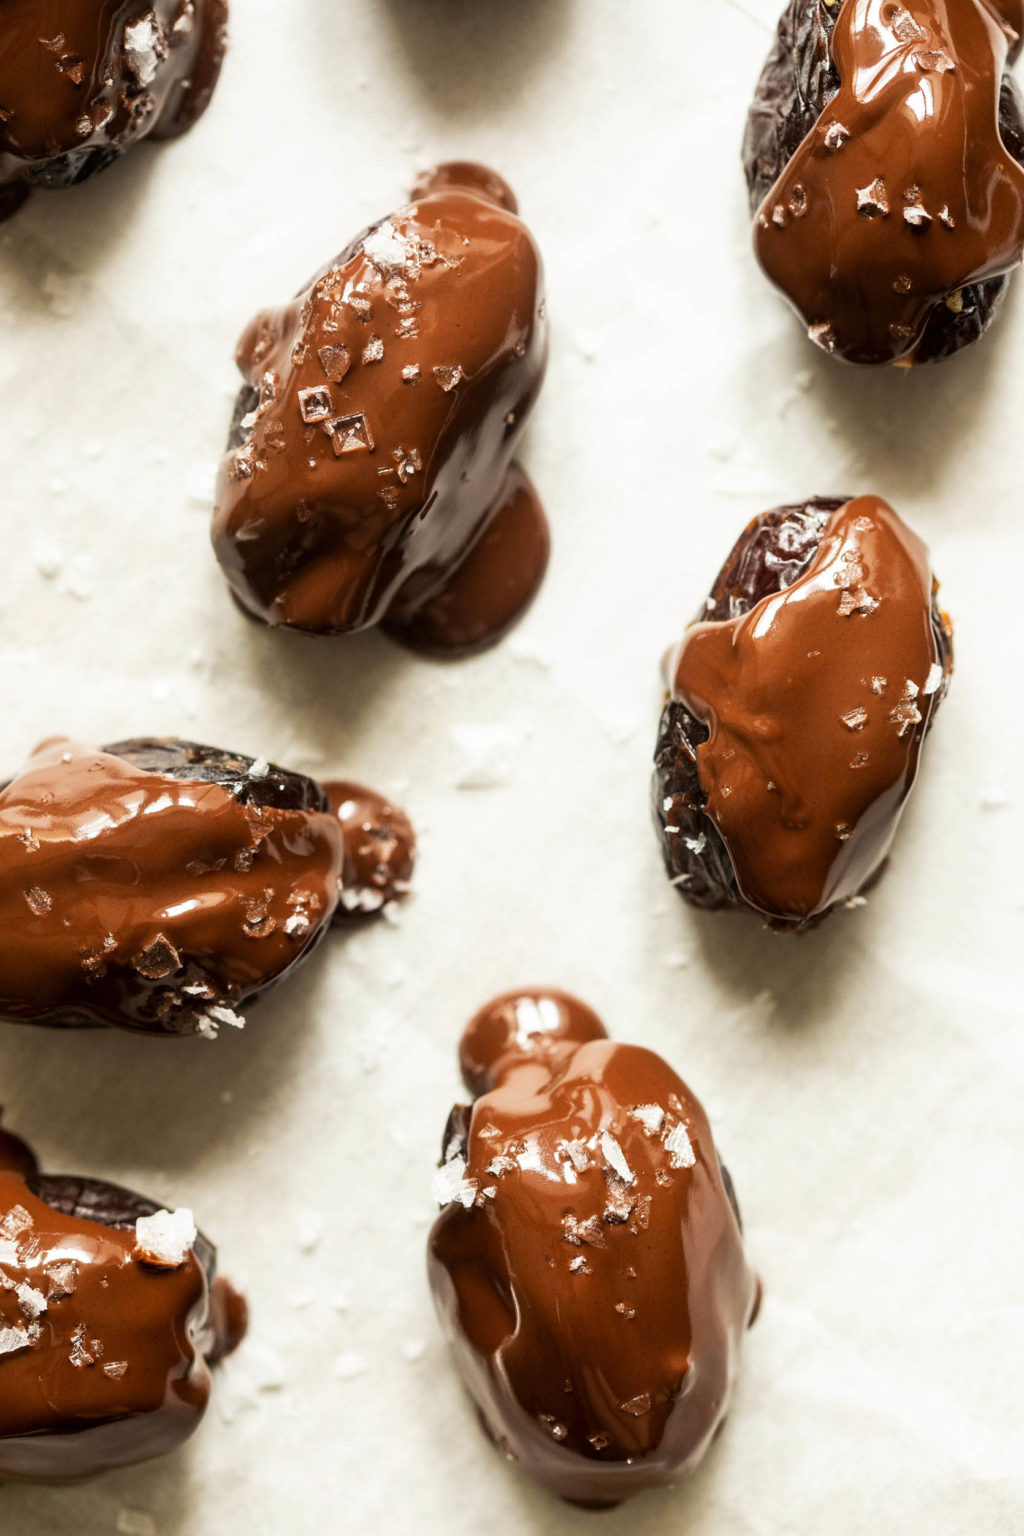 Chocolate dipped, stuffed dates have been sprinkled with flaky sea salt on a sheet of white parchment paper.